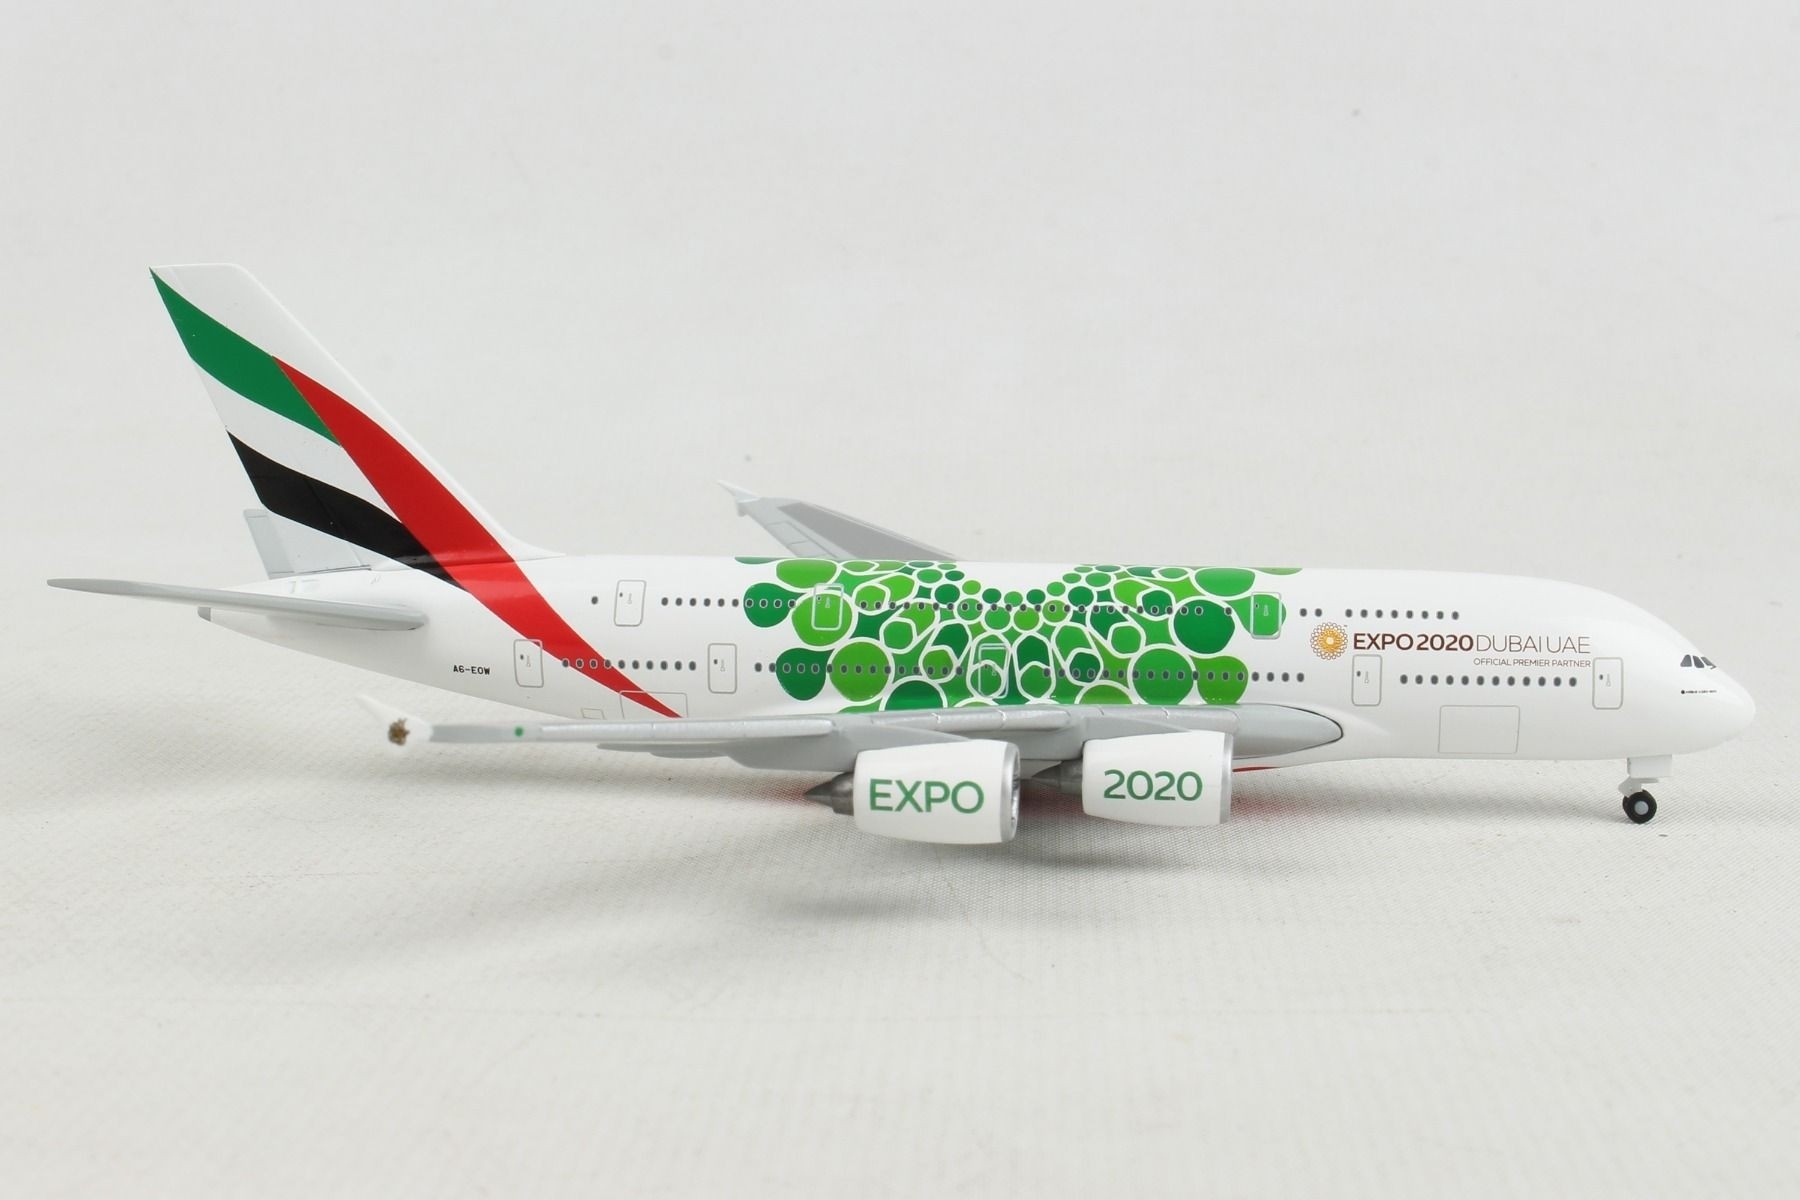 Herpa Wings 1:500 Emirates a380 expo 2020 Dubaï /"Sustainability/" livery 533522